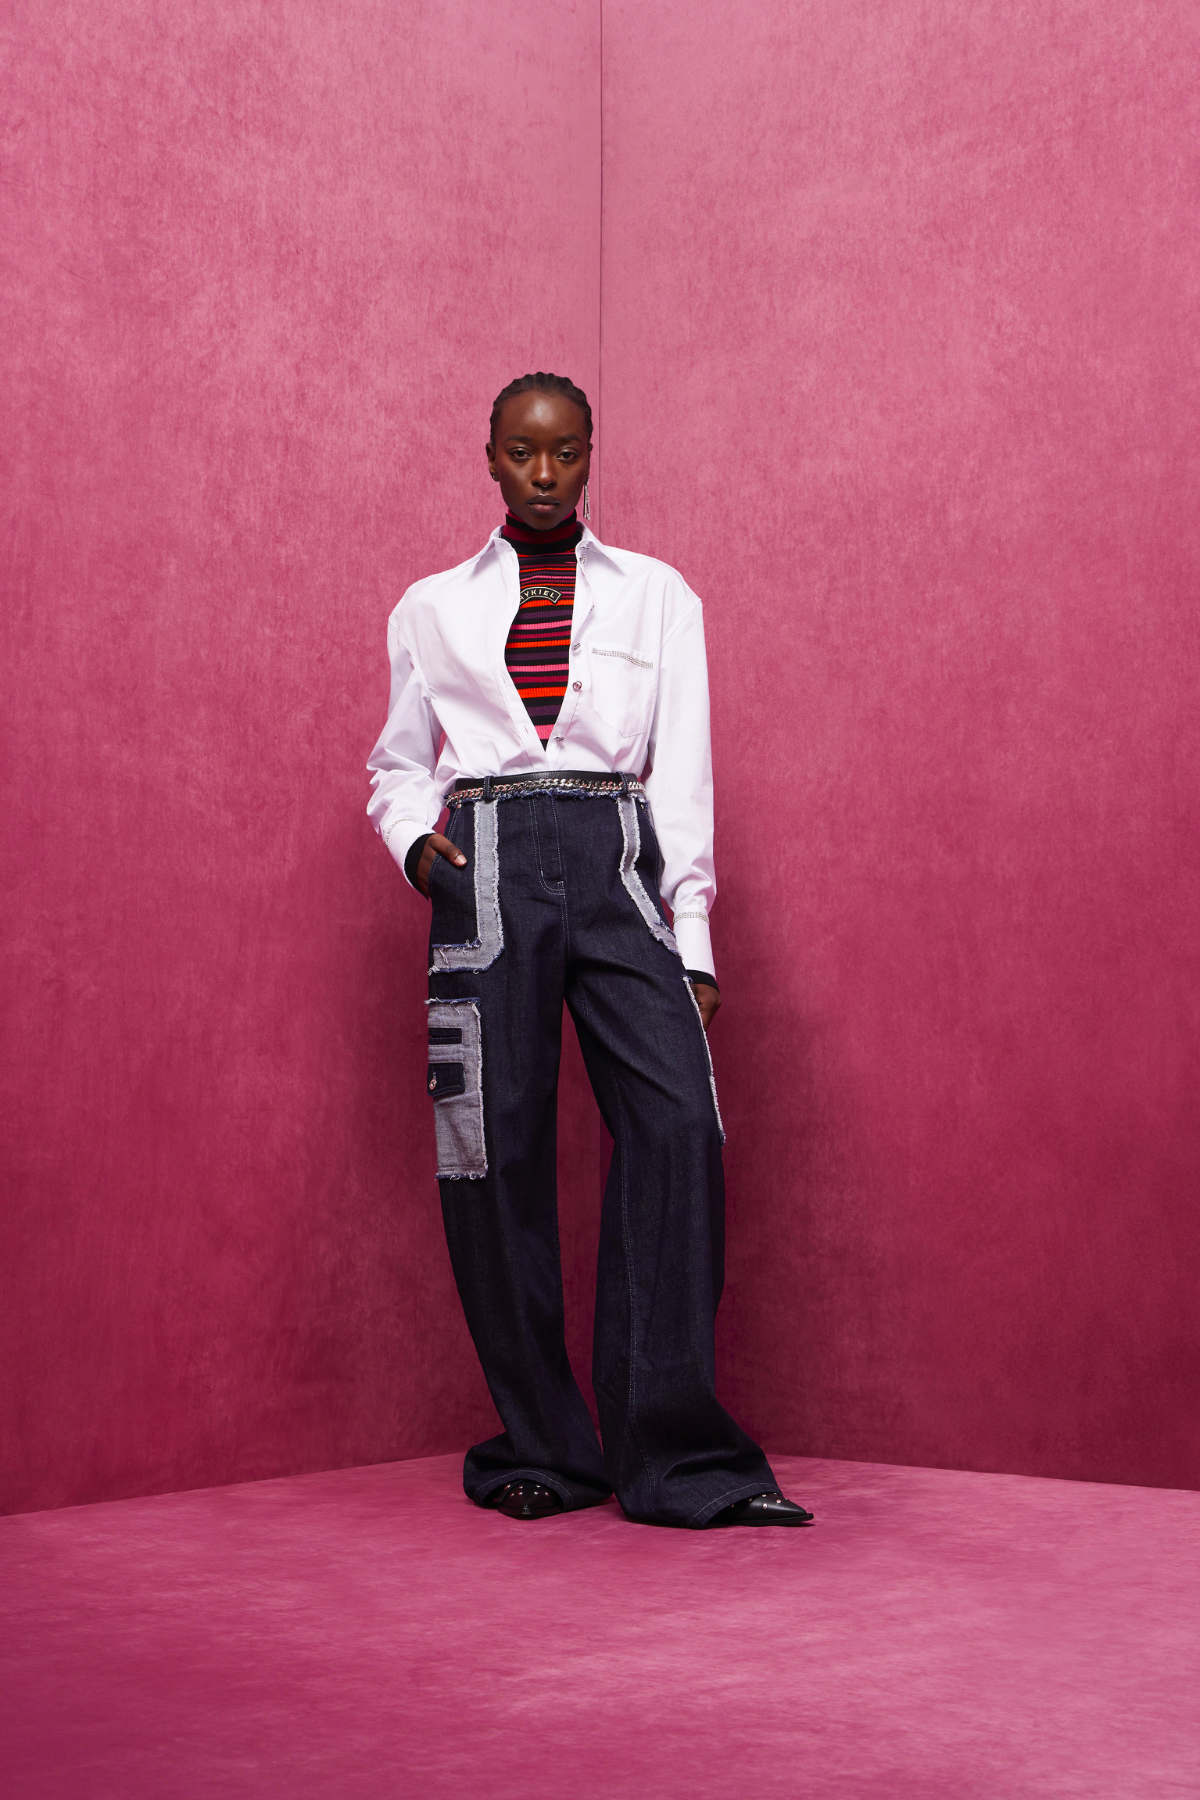 Sonia Rykiel Presents Her New Fall/Winter 2024 Collection